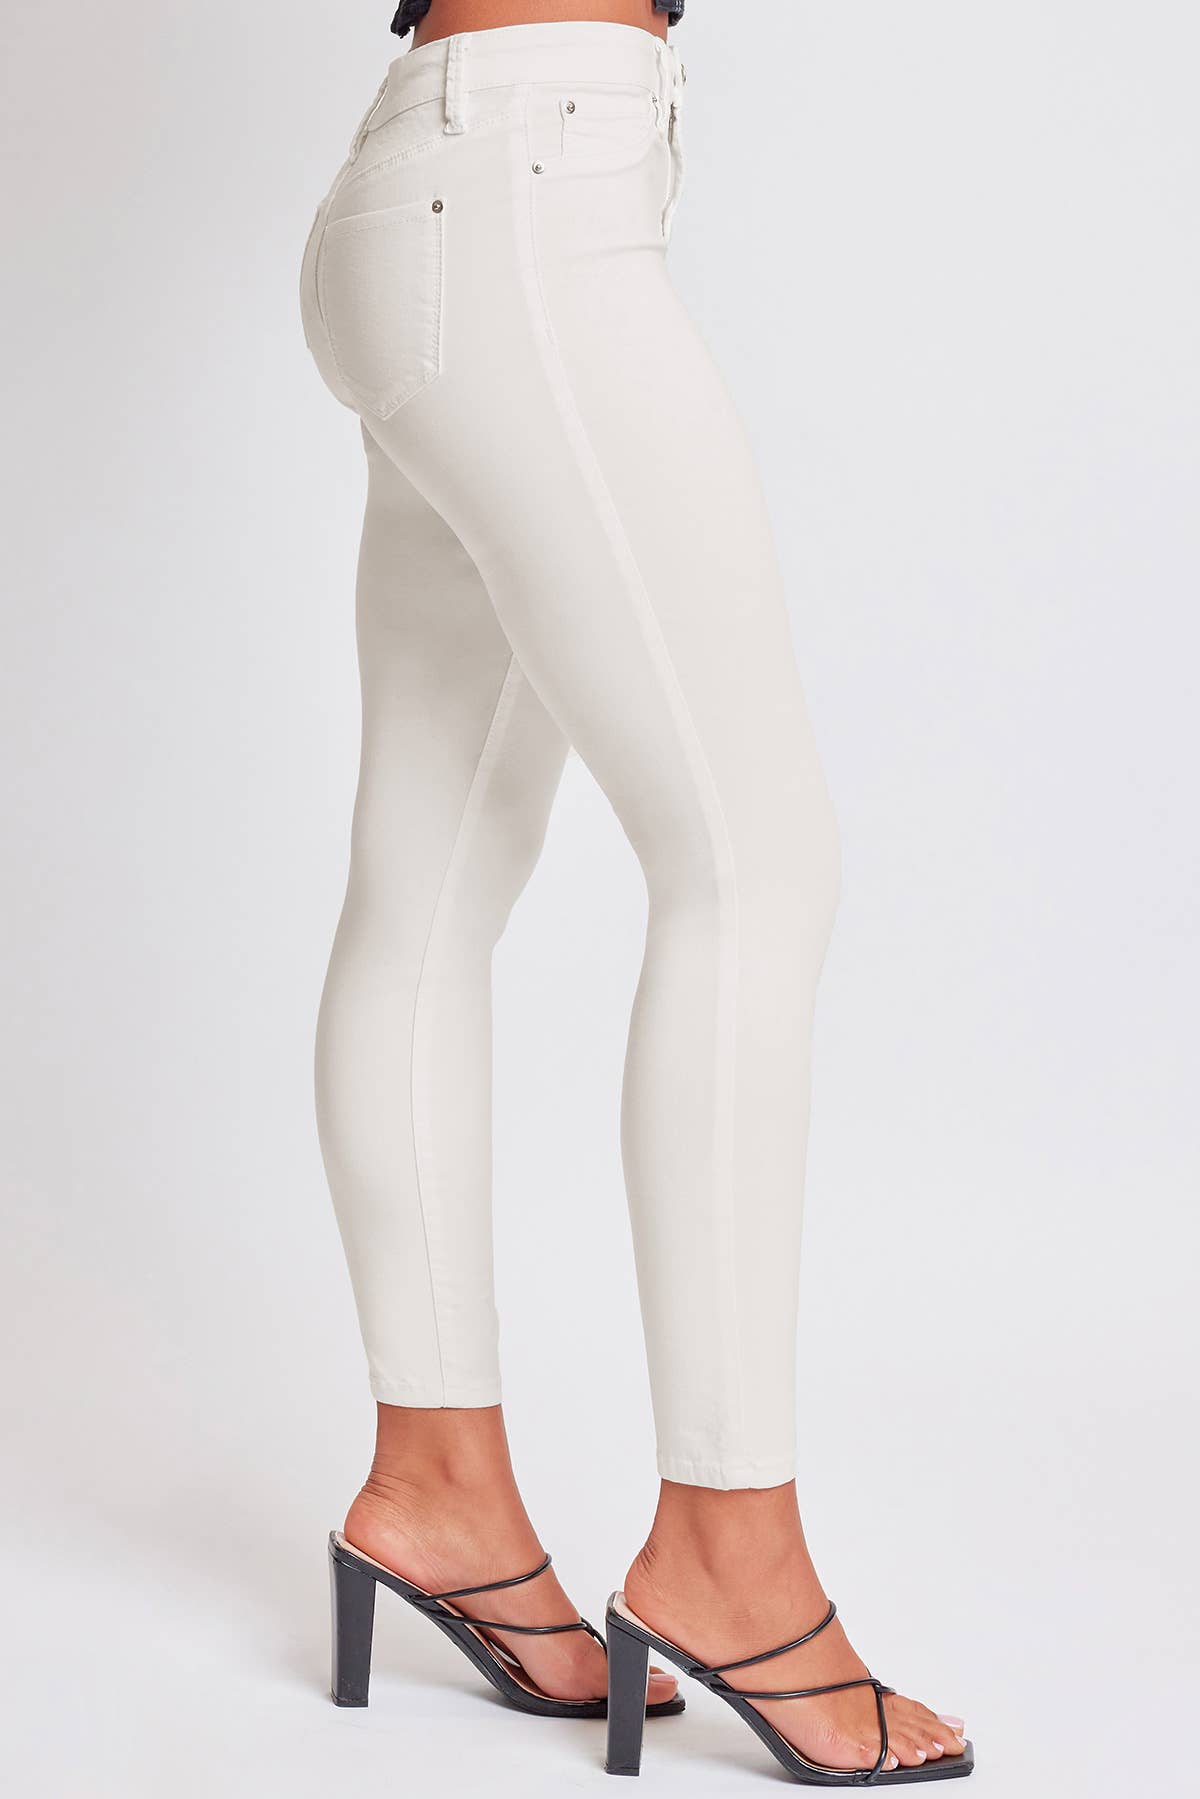 Hyperstretch Mid-Rise Skinny Jean: L / Junior / Shell Pink